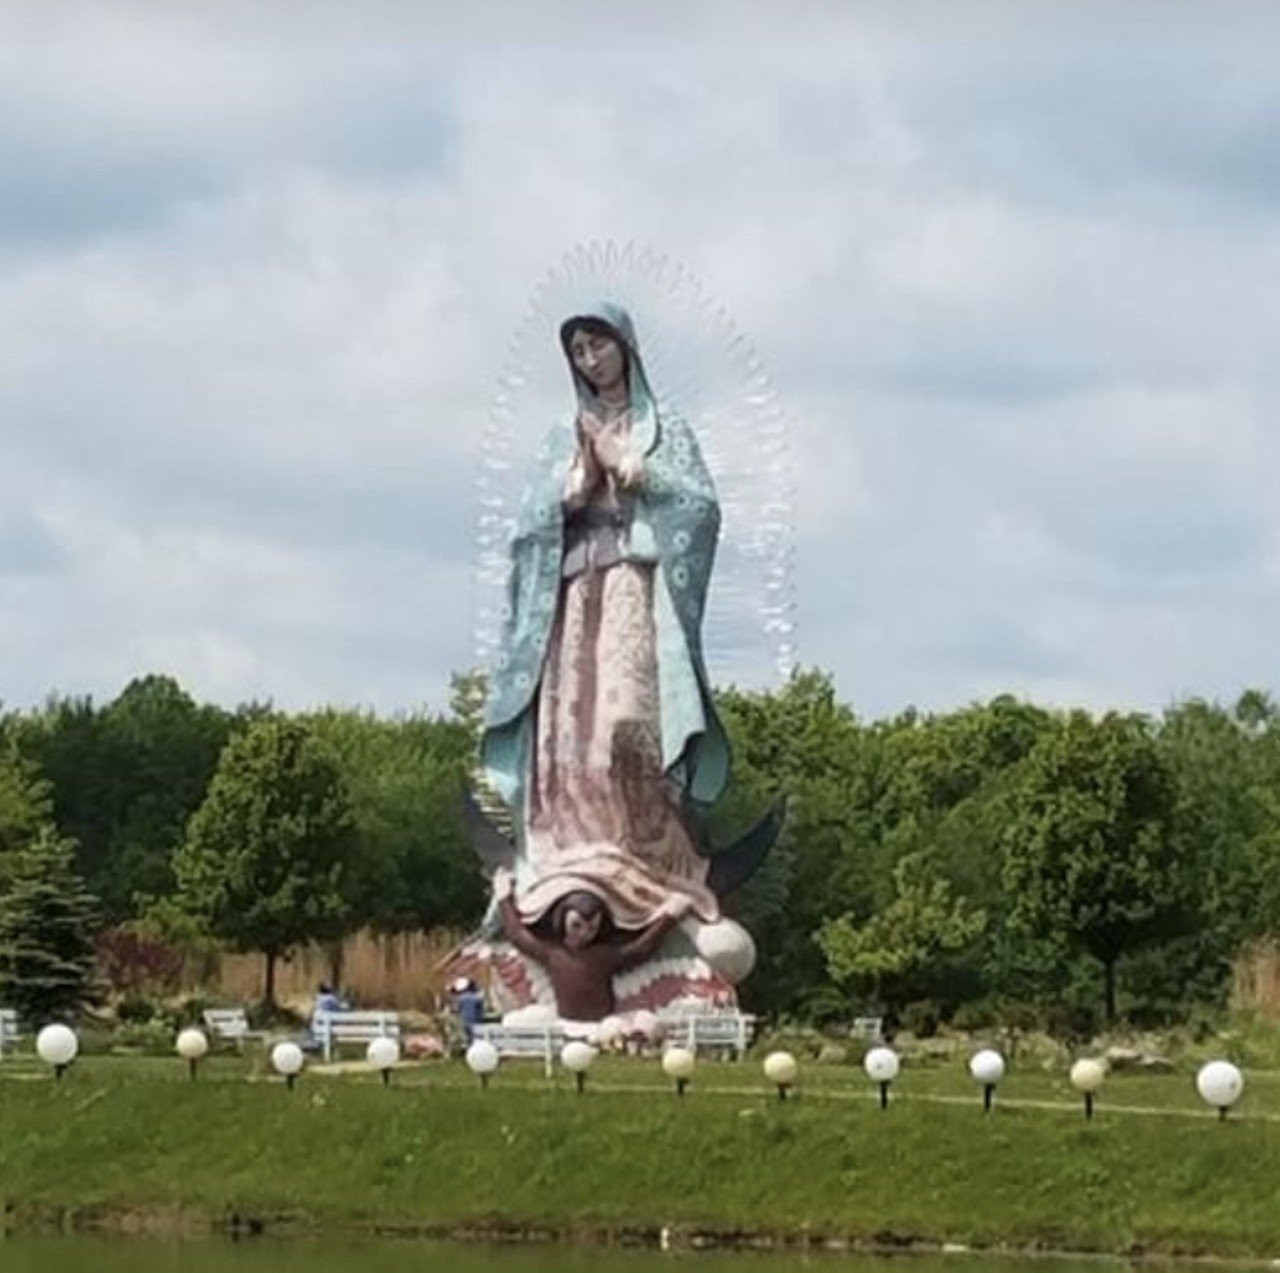 World’s Tallest Our Lady of Guadalupe Statue
6601 Ireland Road, Windsor
Located in Windsor, around 50 miles east of downtown Cleveland, just before you get to Pennsylvania, stands this religious statue, measuring 33 feet tall.